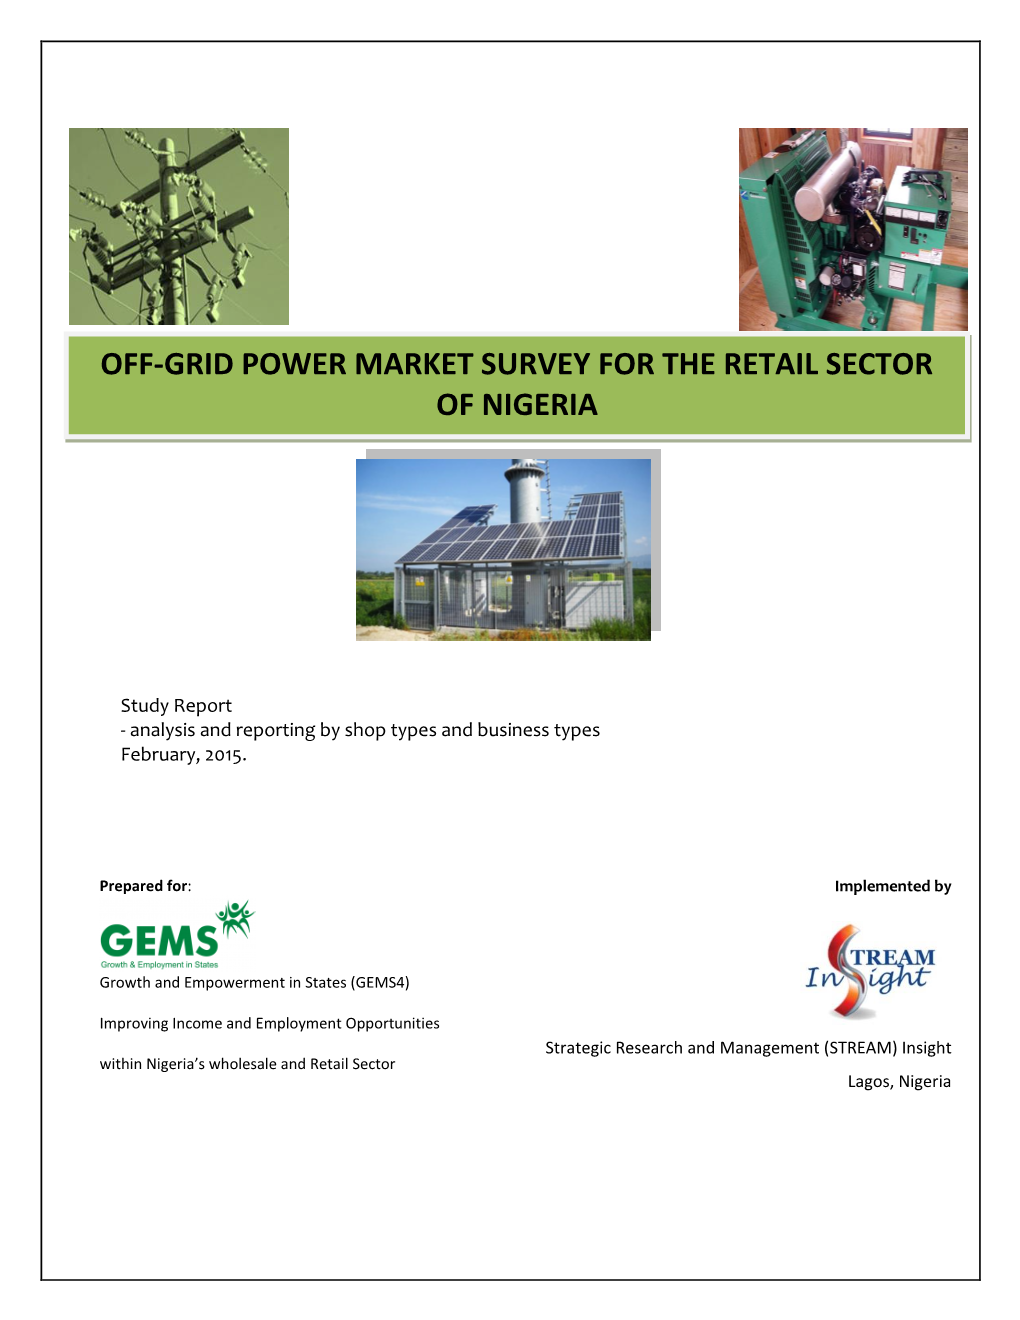 Off-Grid Power Market Survey for the Retail Sector of Nigeria – Final Report 2